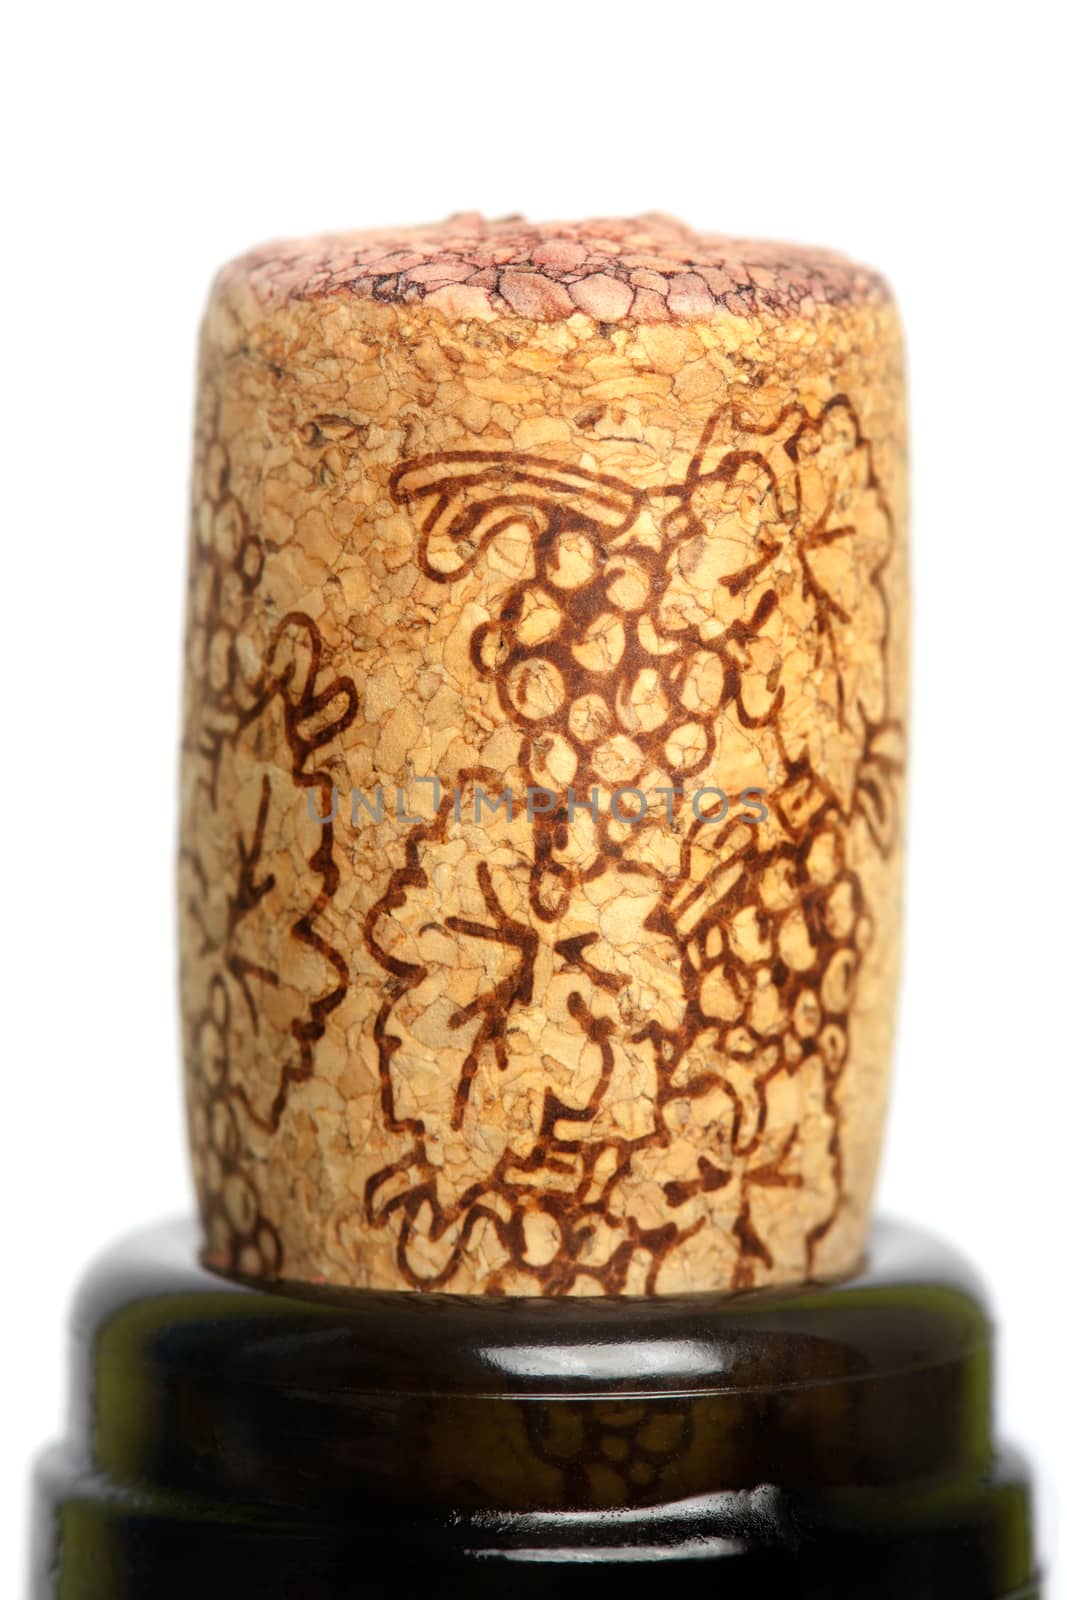 Cork in a bottle on a white background closeup